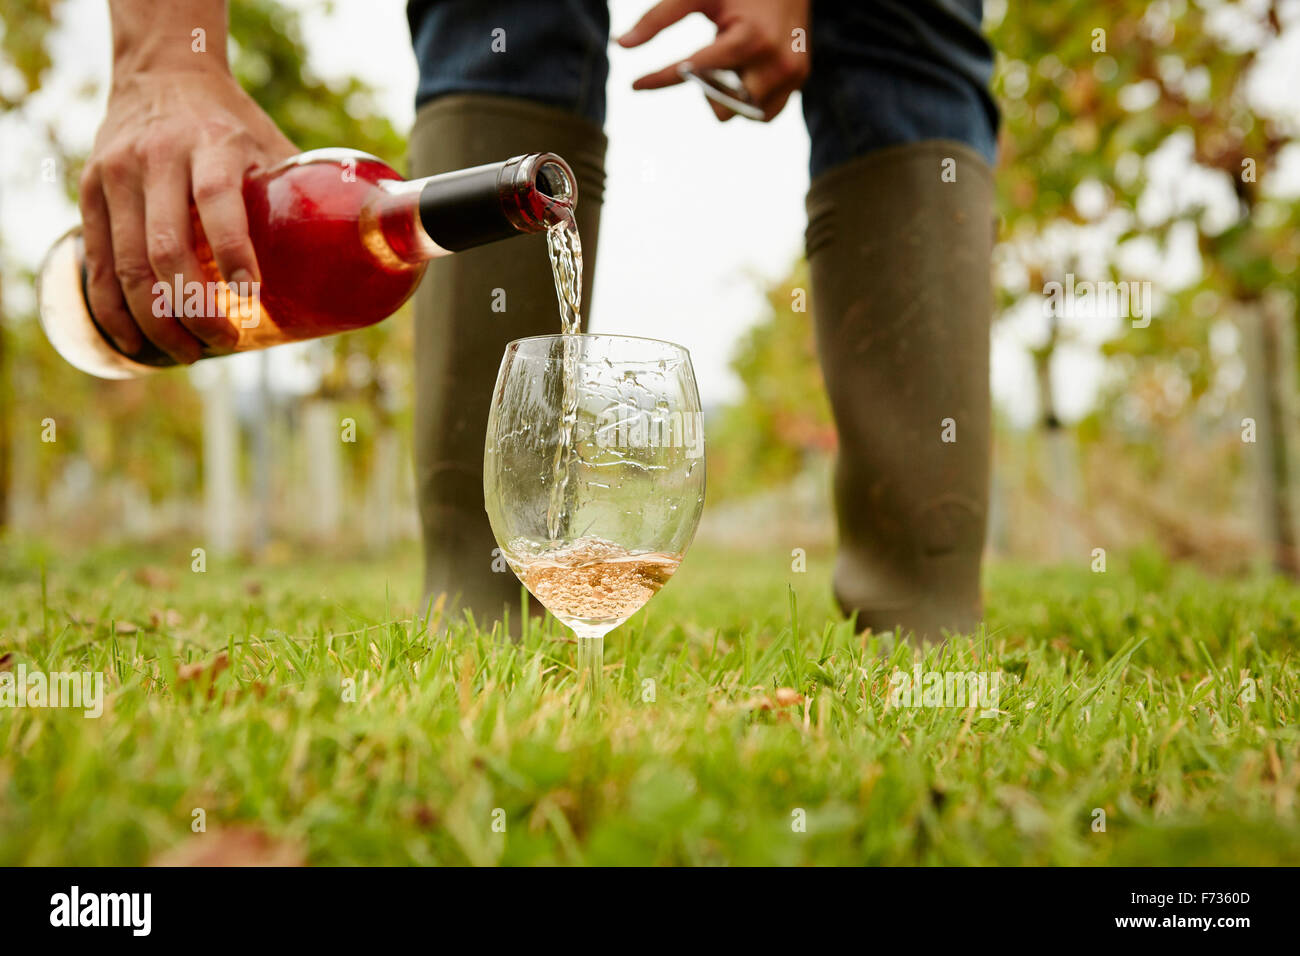 A person pouring rose wine from a bottle into a glass. Stock Photo